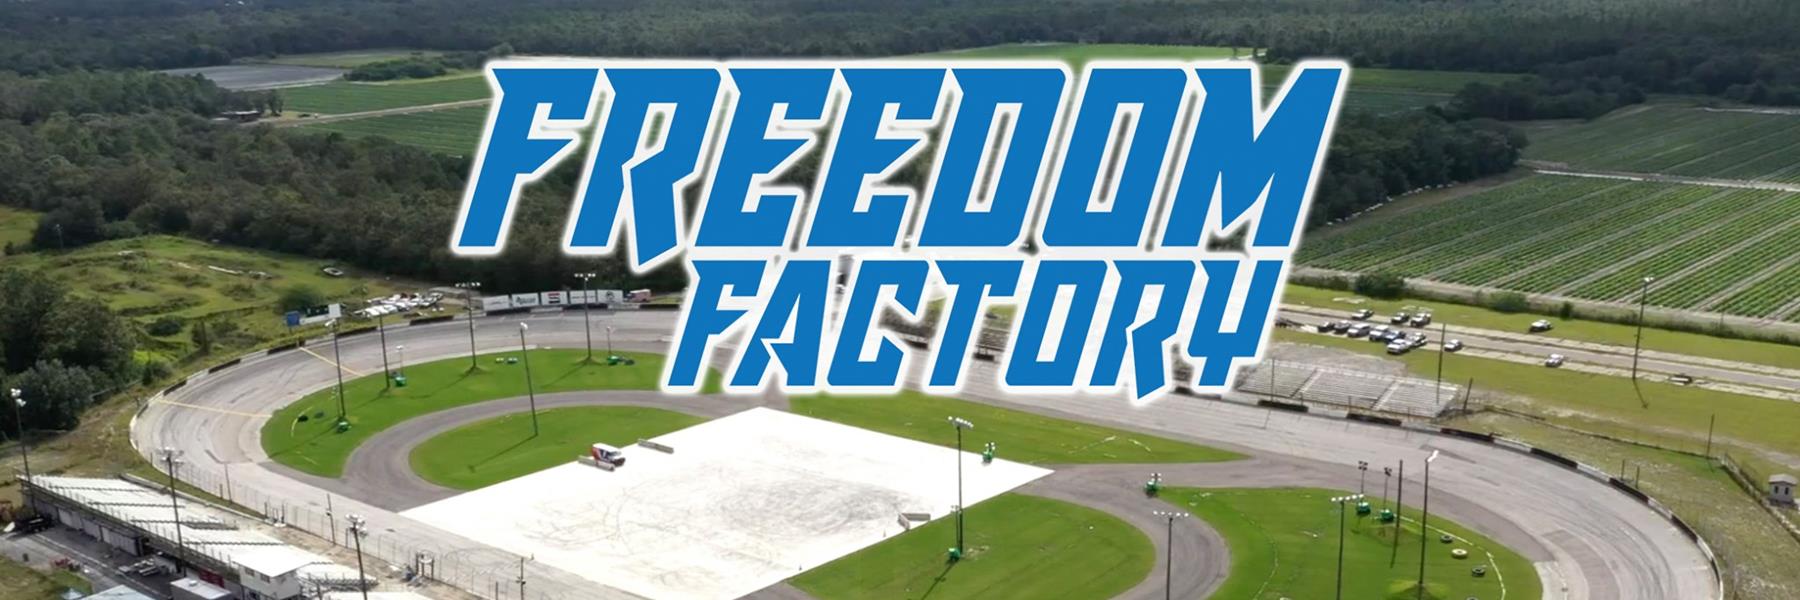 5/21/2016 - Freedom Factory